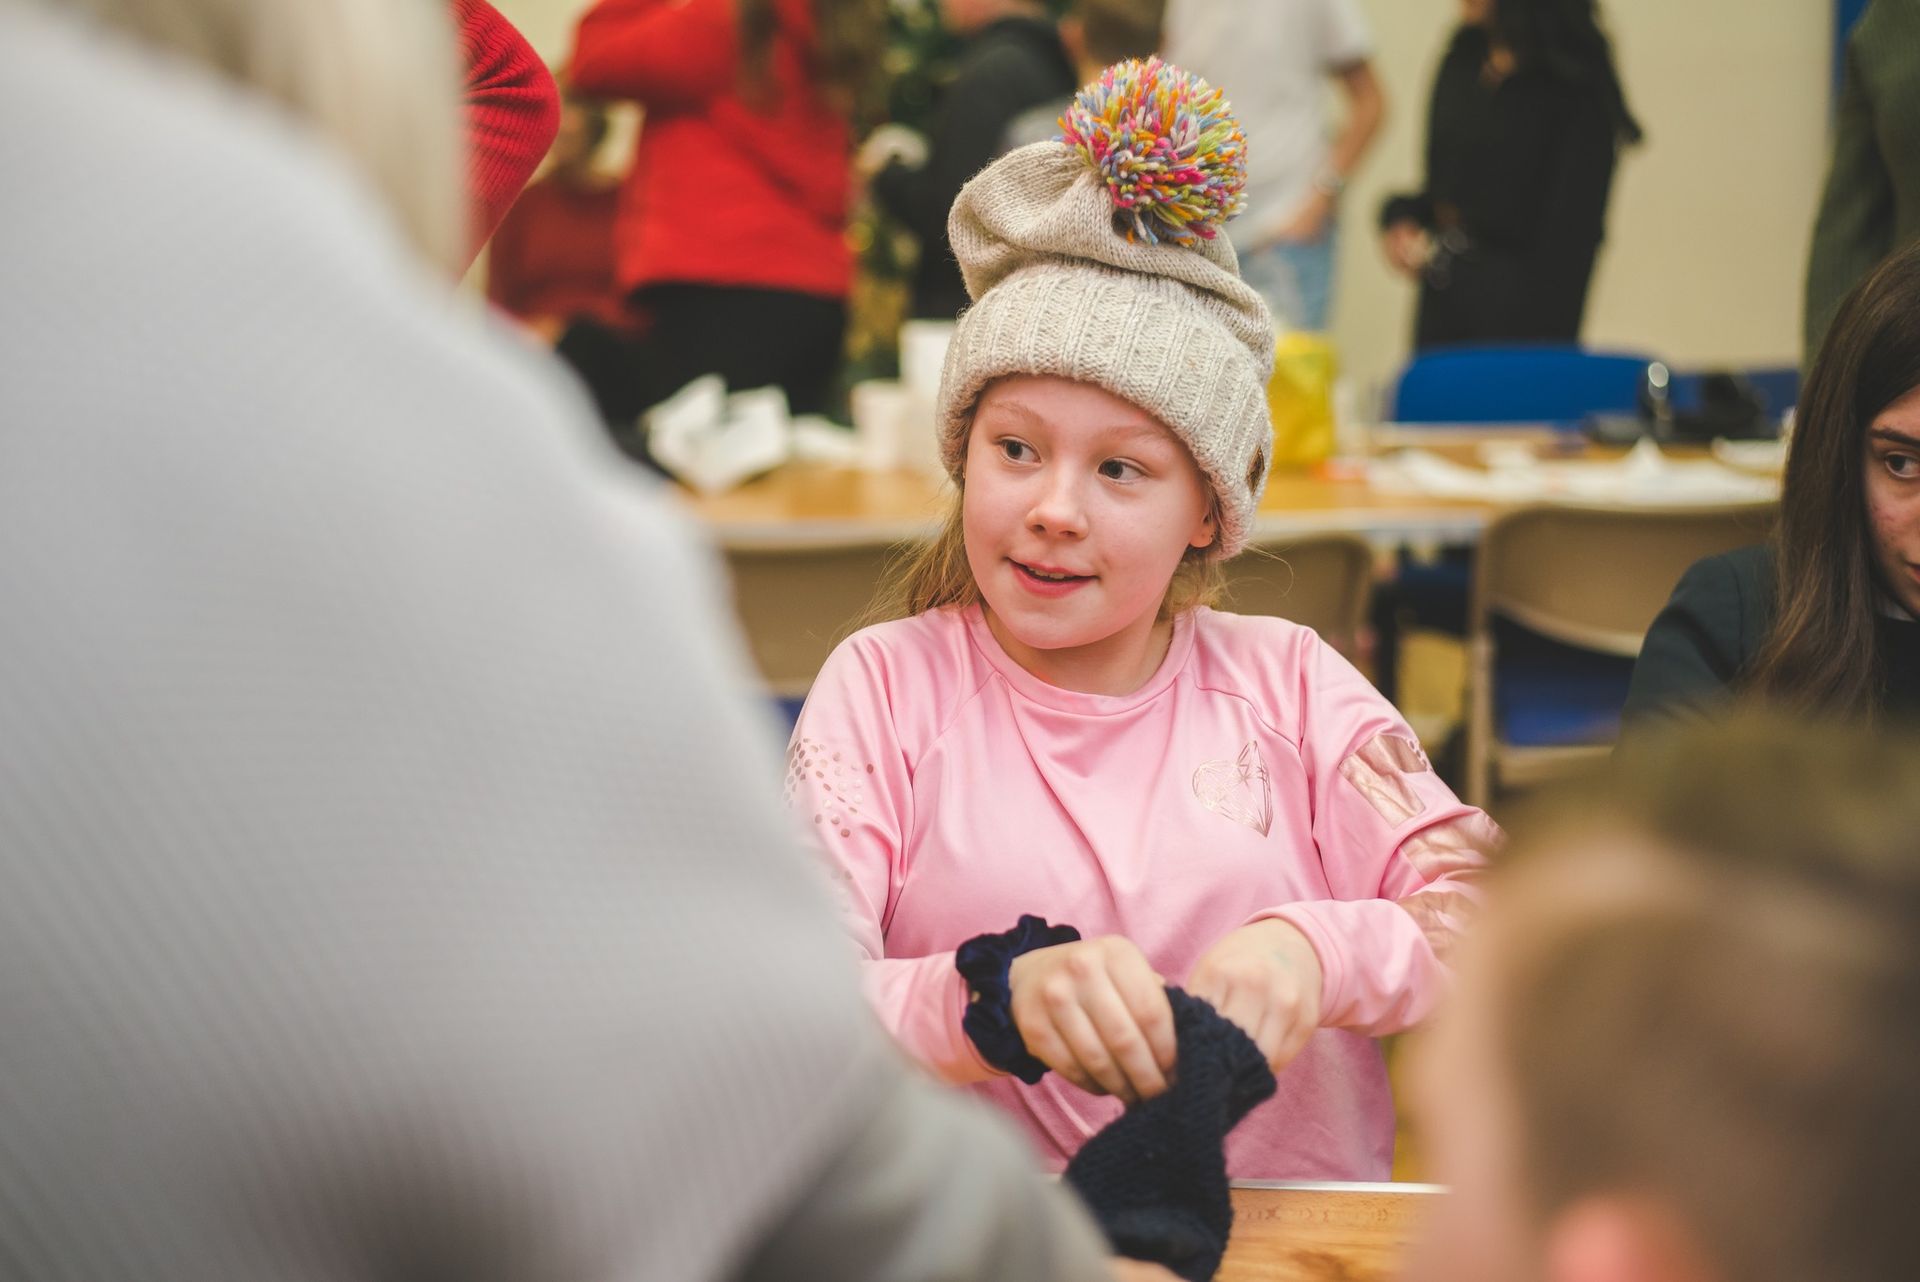 An image of a female child sat at a table wearing a pink jumper, a cream woolly hat. She is putting on a pair of black gloves and looking into the distance.